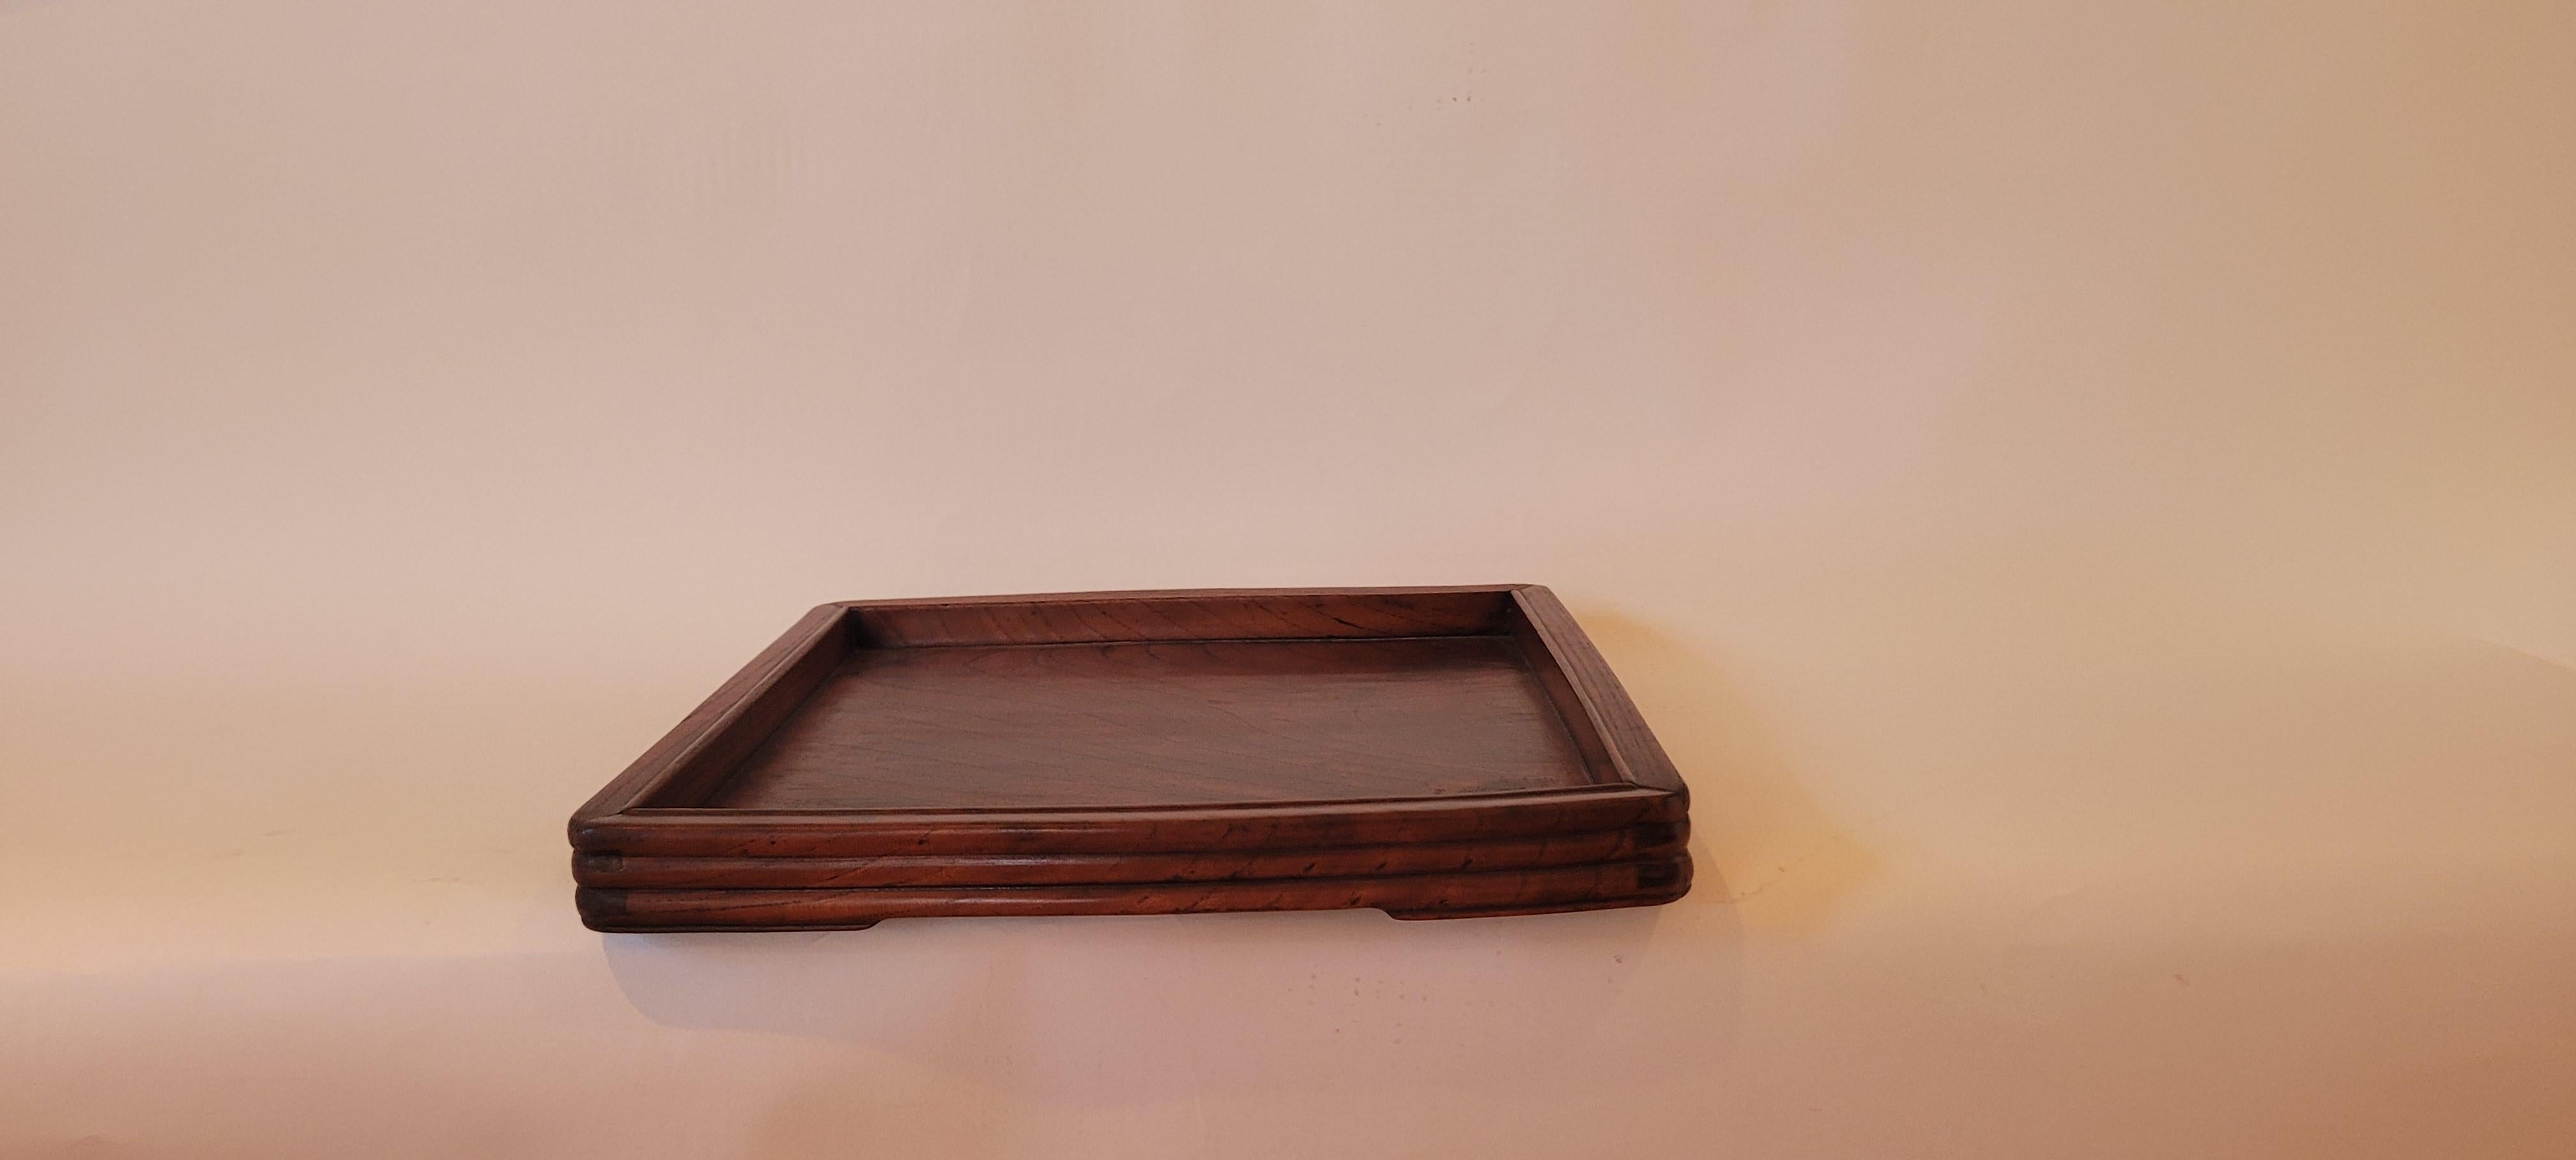 Tray
This is a square tea tray with beaded edge beveled frame members and corner small base.

Material:	Jumu (Southern Elm)
Size:		1.25h x 13w x 13d
Origin:		Zhejiang
Age:		Late 19th Century
